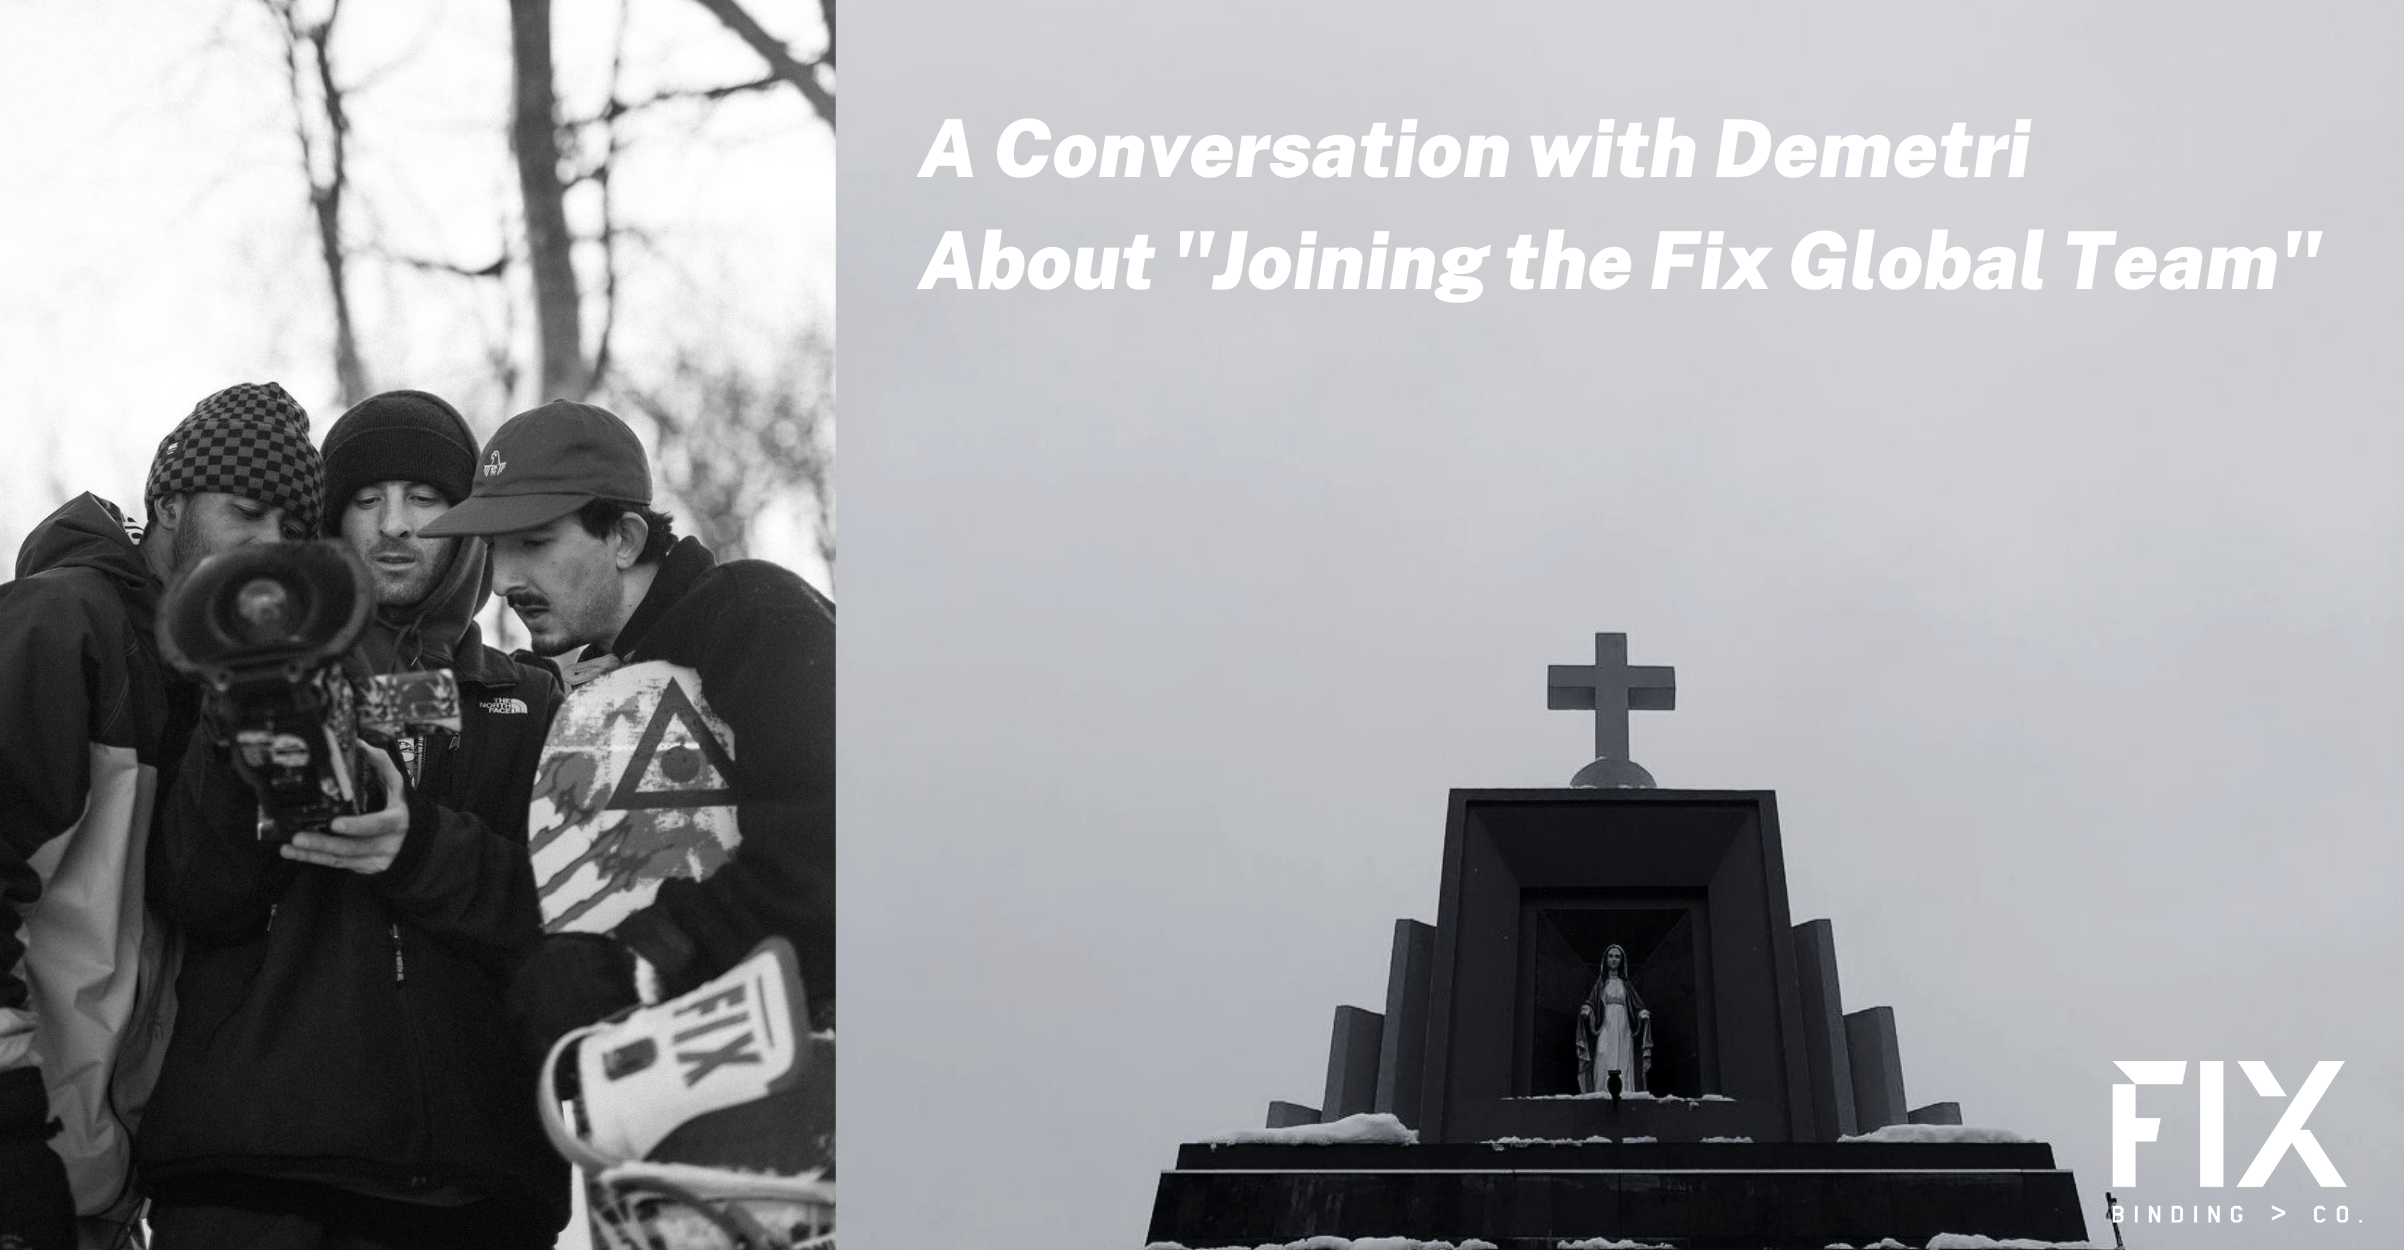 A Conversation with Demetri About “Joining the Fix Global Team”